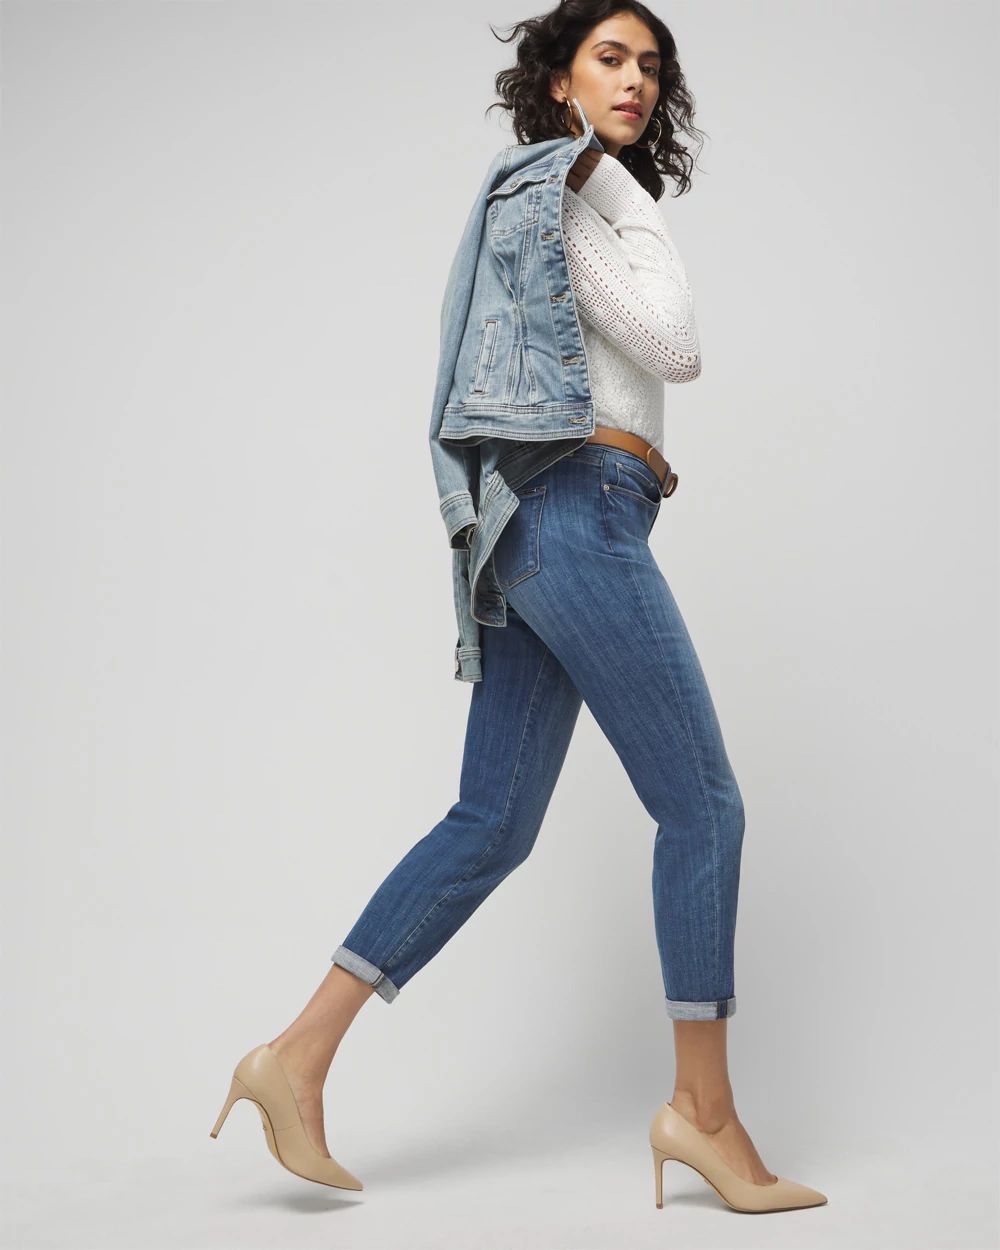 Mid-Rise Everyday Soft Denim  Girlfriend Jeans click to view larger image.